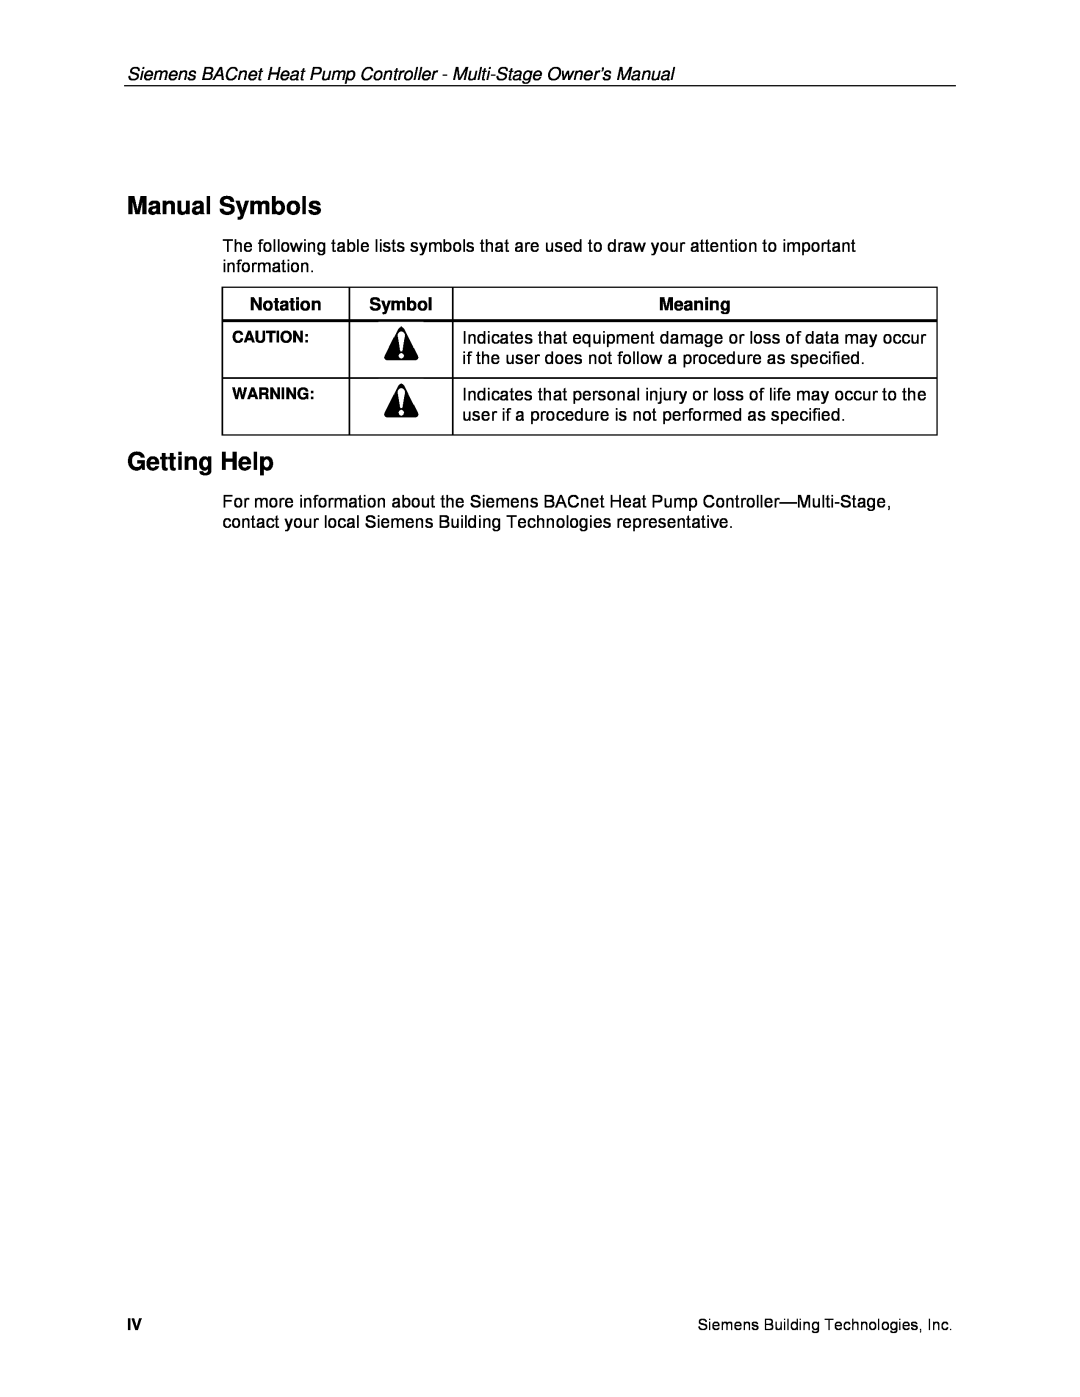 Siemens 125-699 owner manual Manual Symbols, Getting Help, Notation, Meaning 